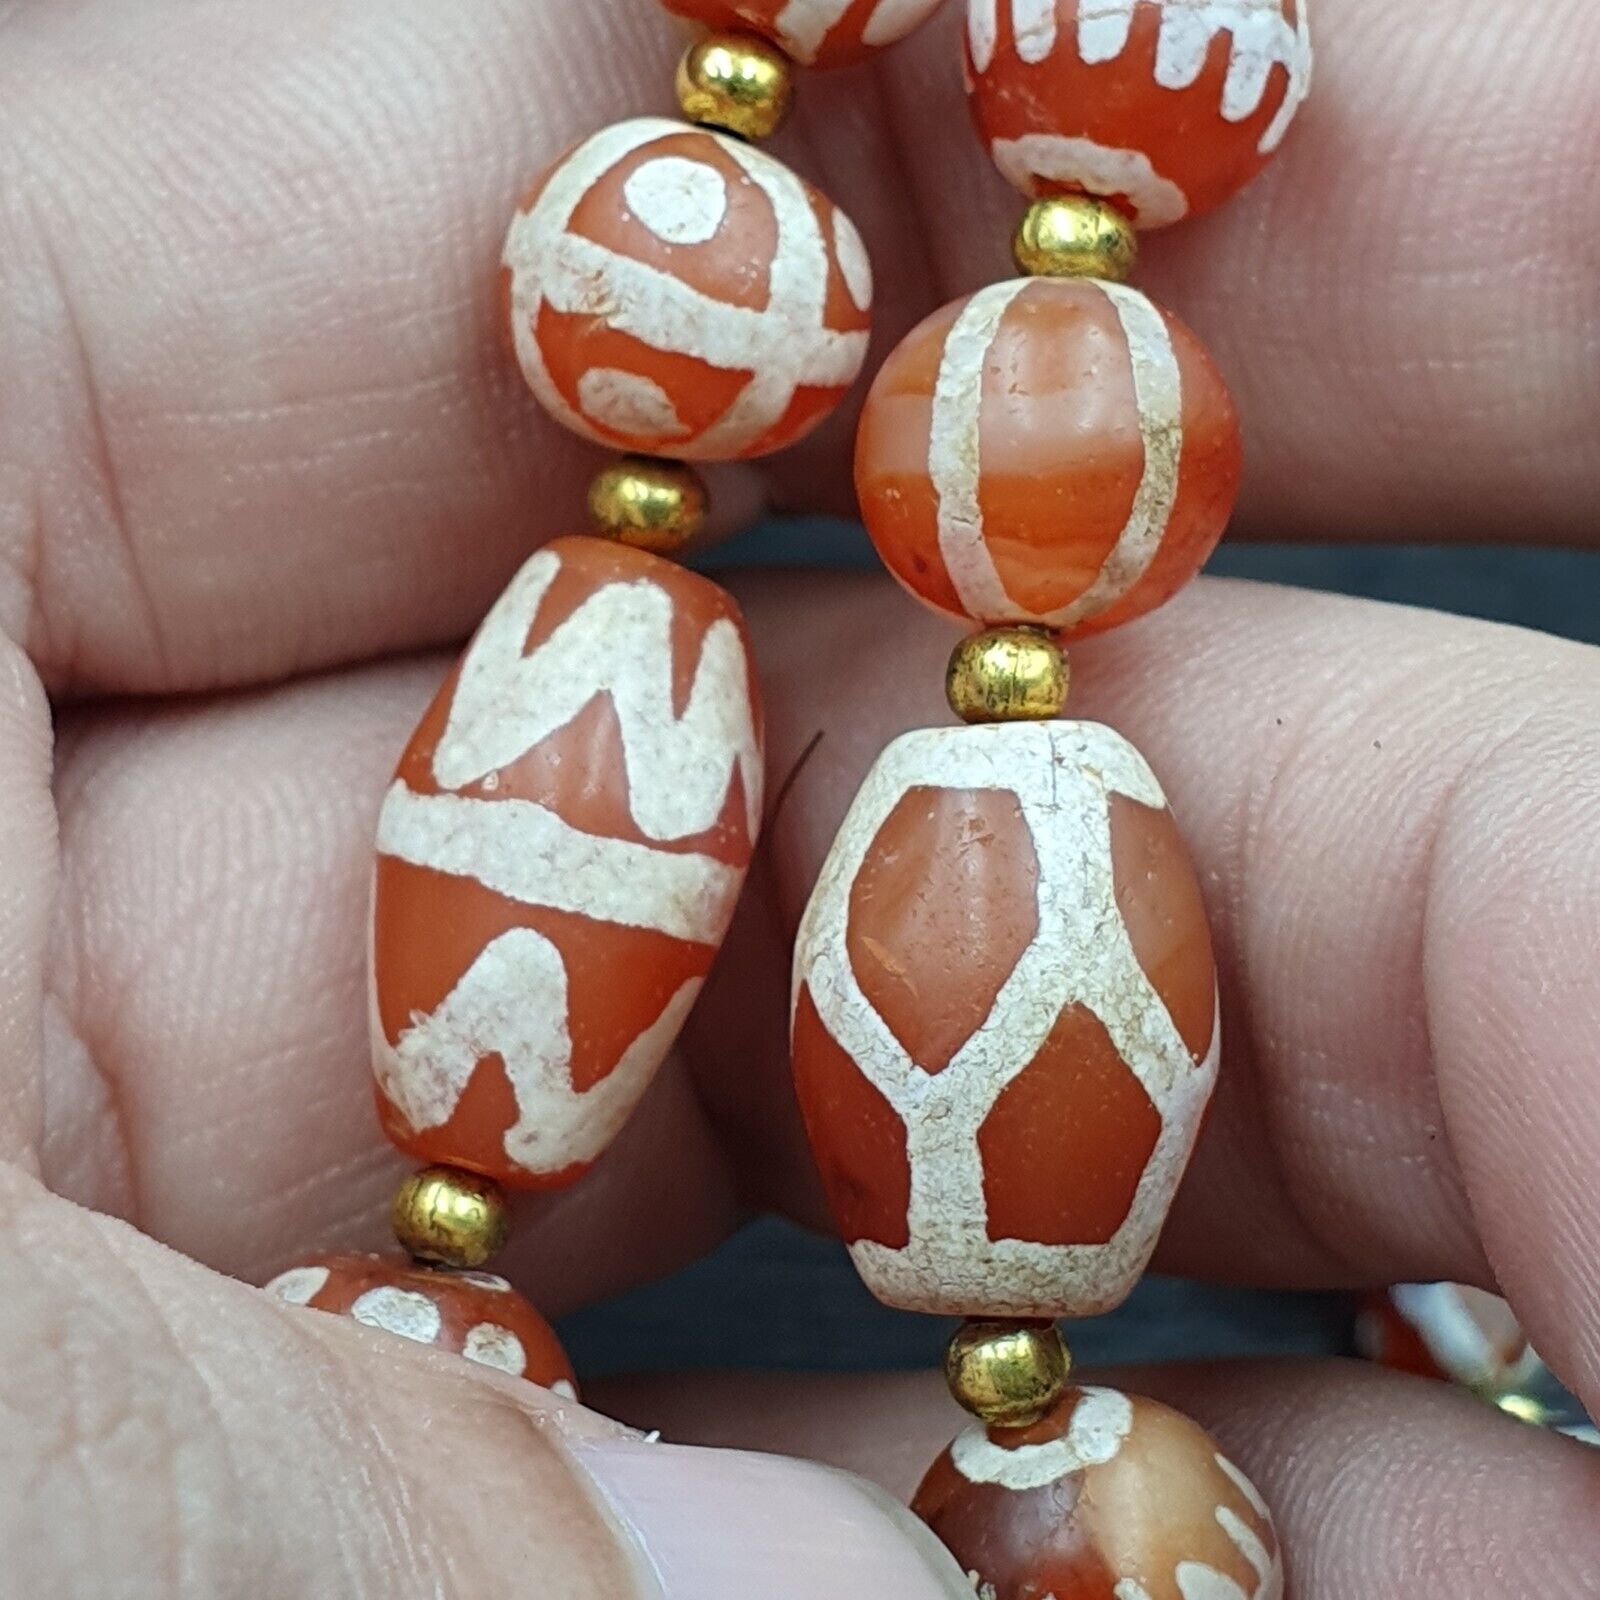 Rare collection Antique Tibetan Central Asian Etched Agate beads Necklace